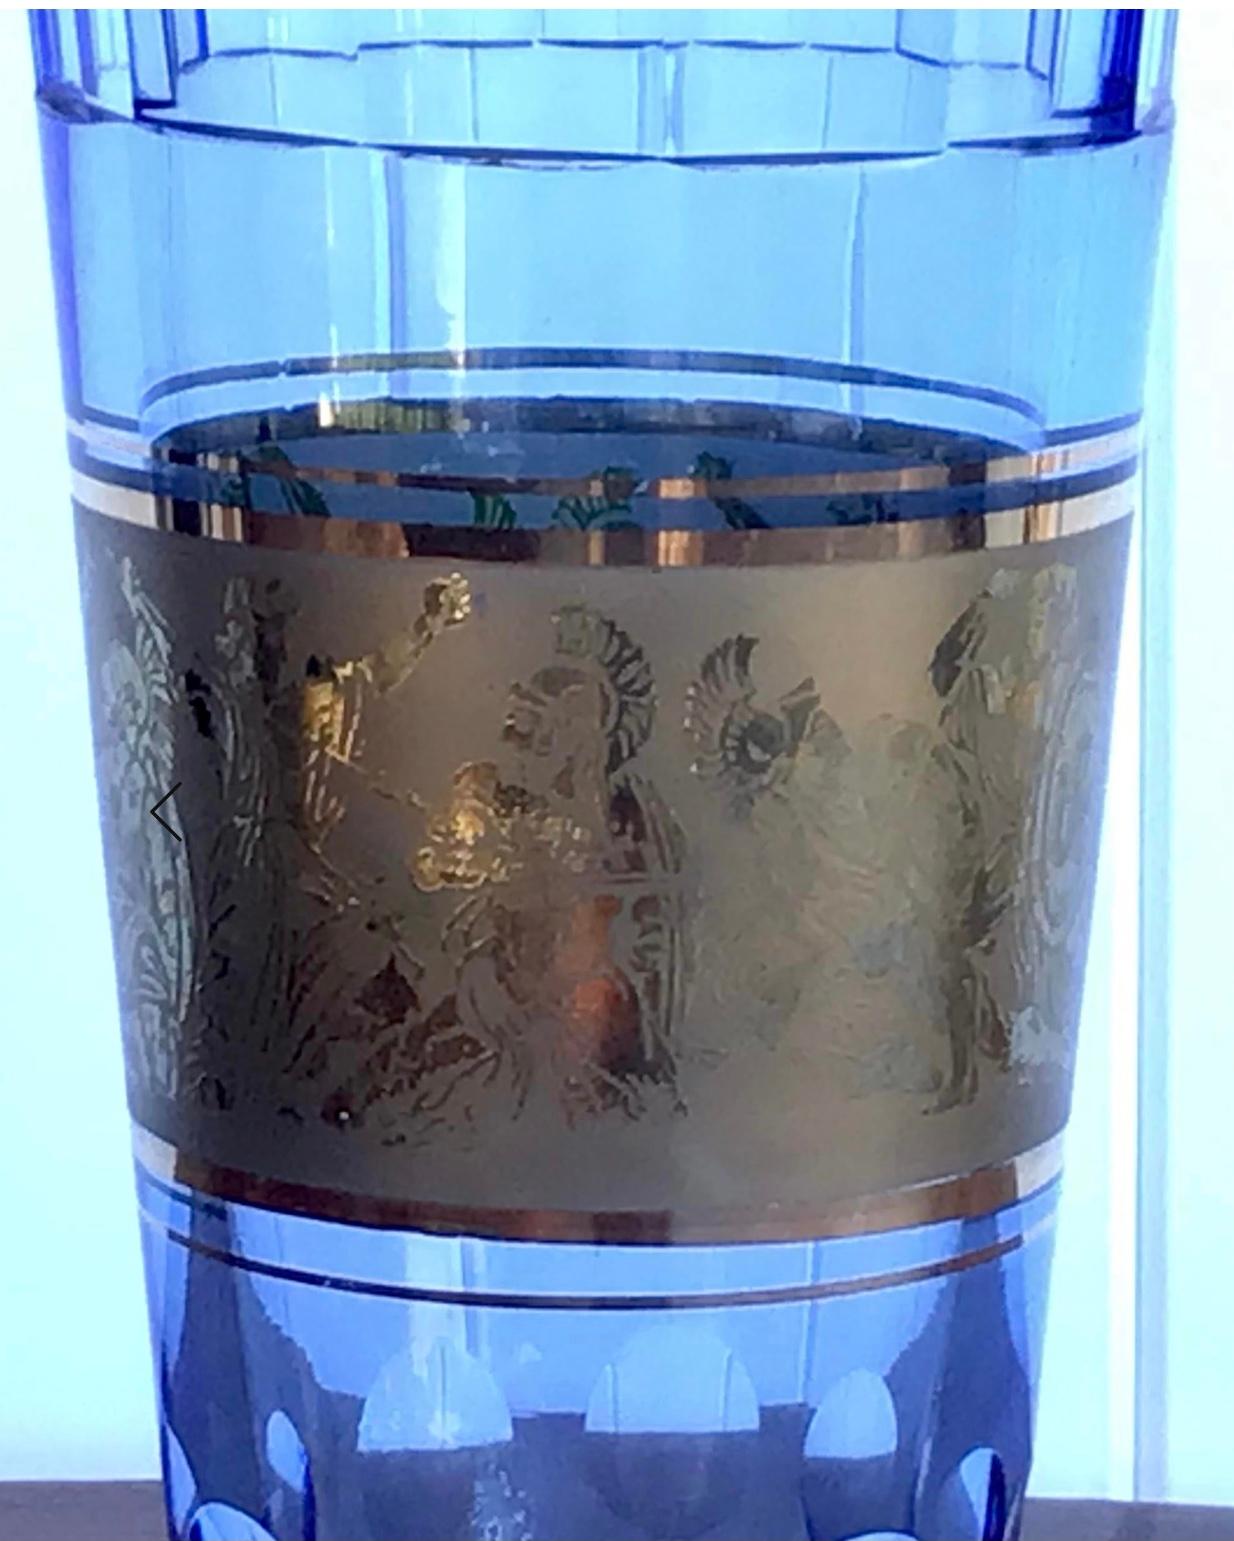 Moser Glass (Czechoslovakia) design of a blue crystal colored vase that features classical warriors in gold relief. This piece doesn't have a label or a signature, but may have been one of Josef Hoffmann's designs created in the 1920s. It is heavy